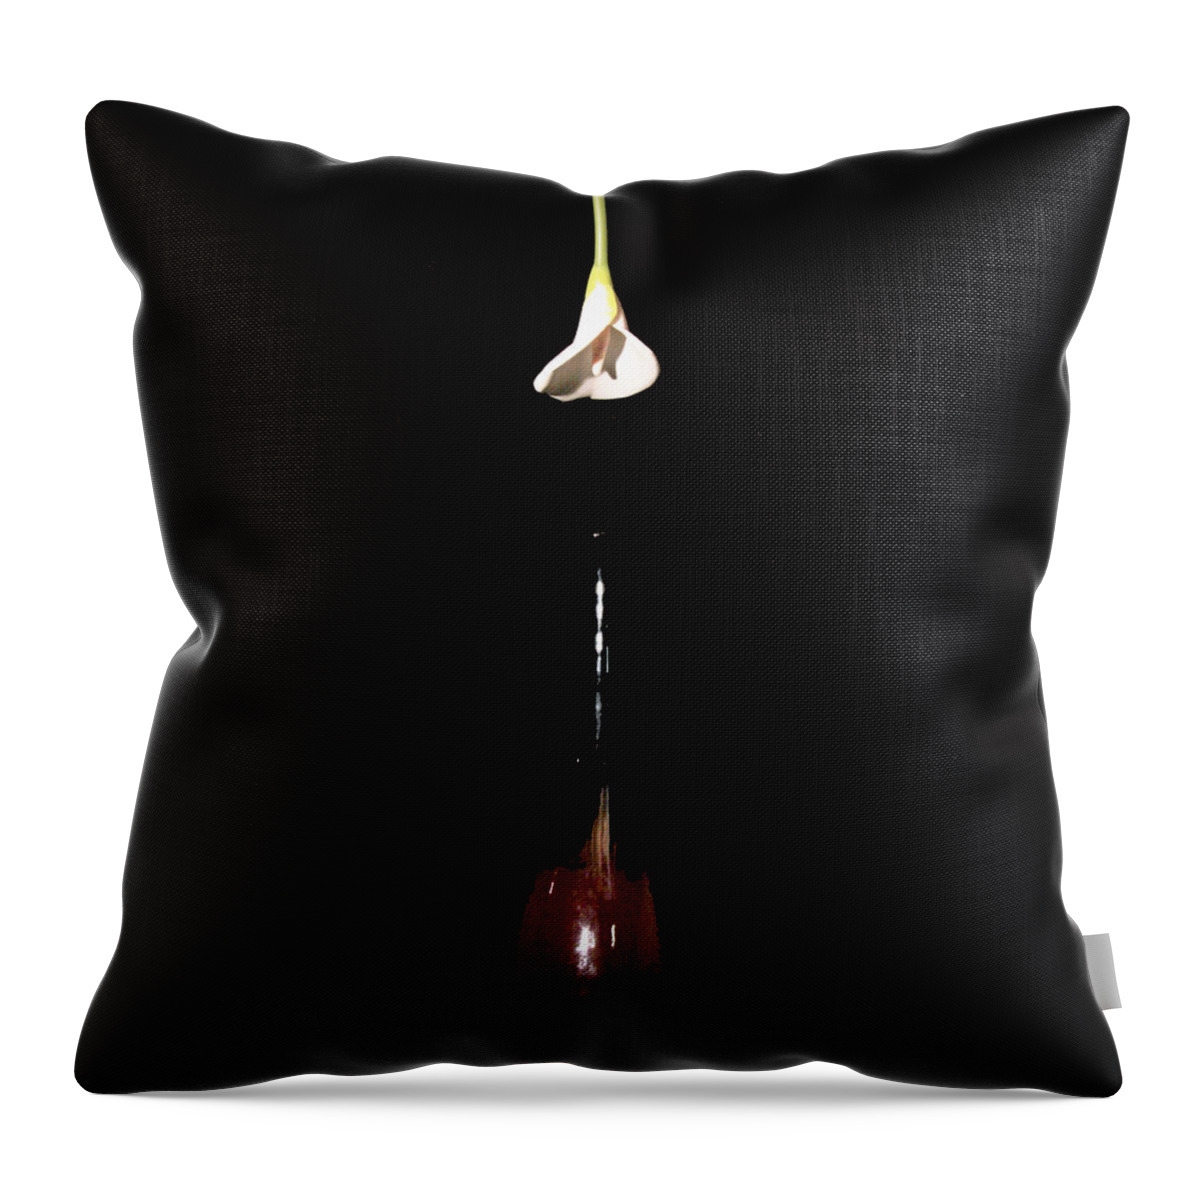 Photography Throw Pillow featuring the photograph Calla Lily and Vase by John Stuart Webbstock